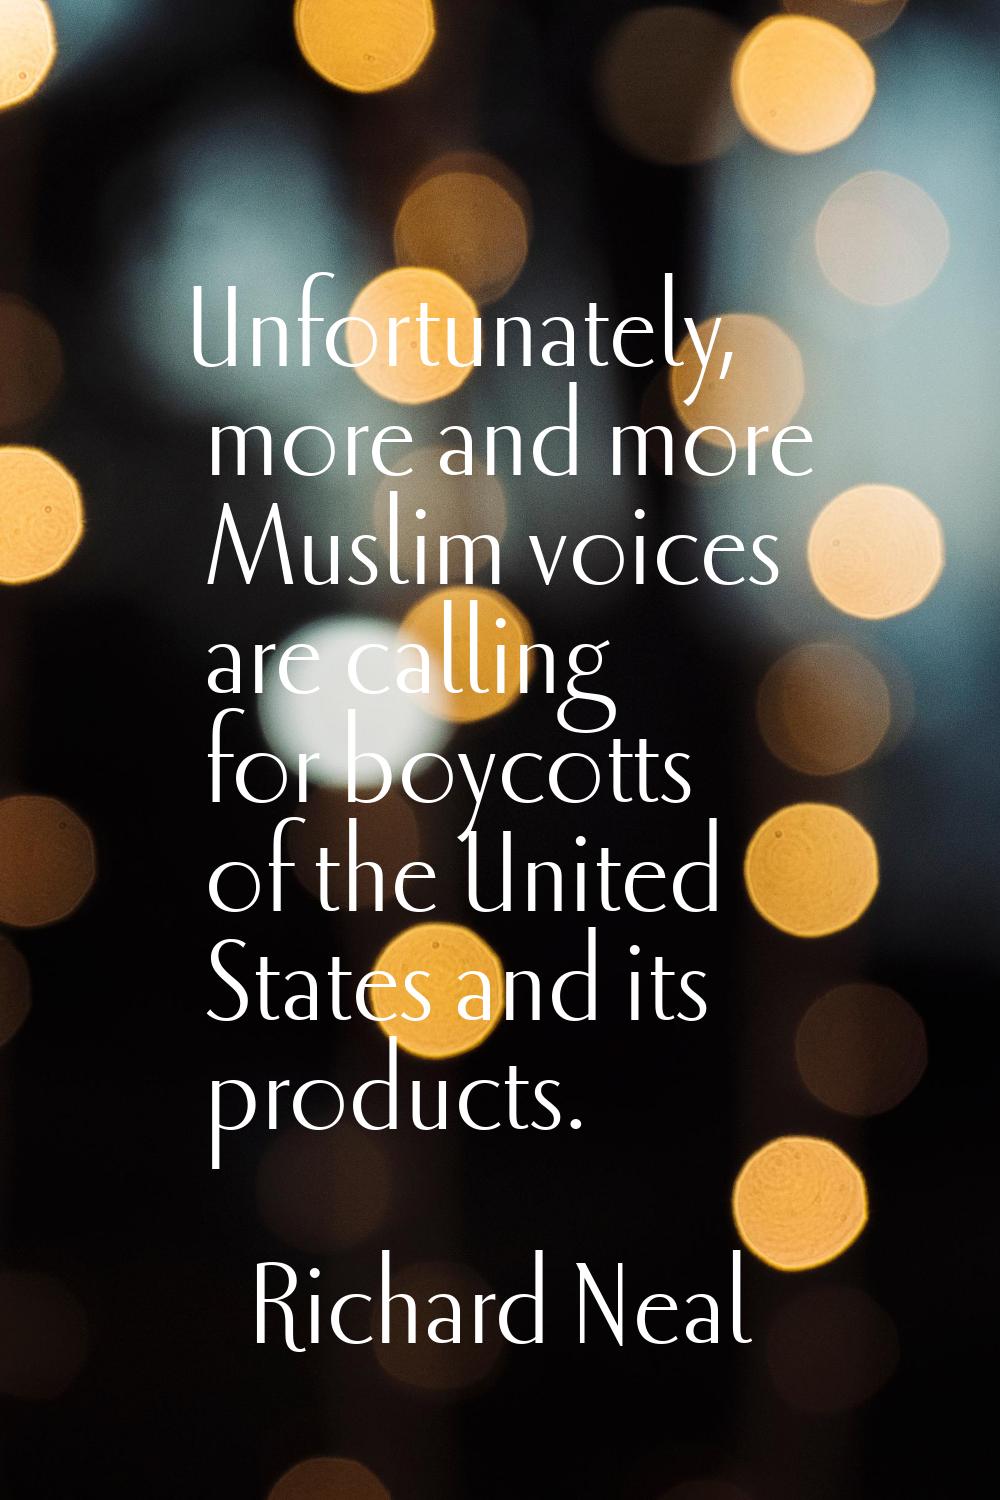 Unfortunately, more and more Muslim voices are calling for boycotts of the United States and its pr